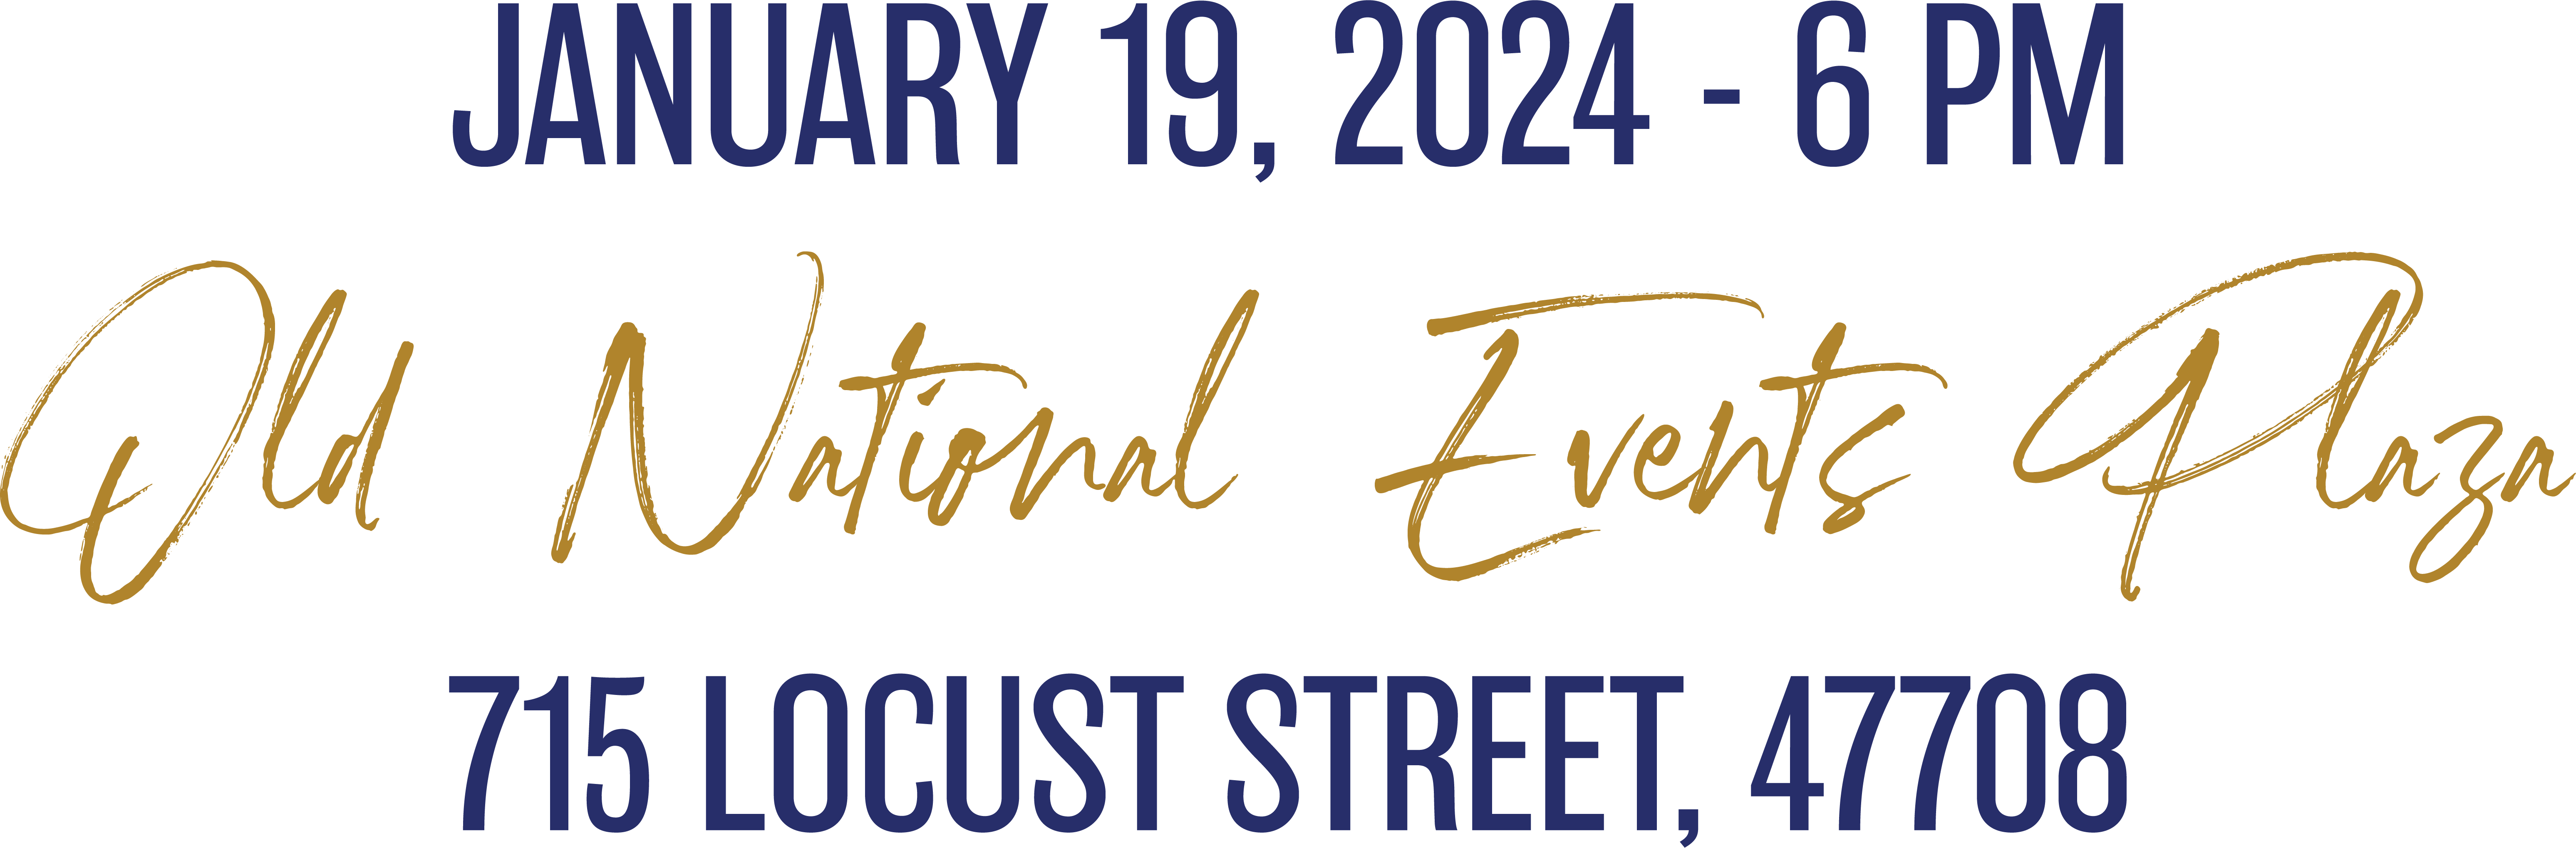 January 19, 2024 - 6 pm, Old National Events Plaza, 715 Locust Street, 47708